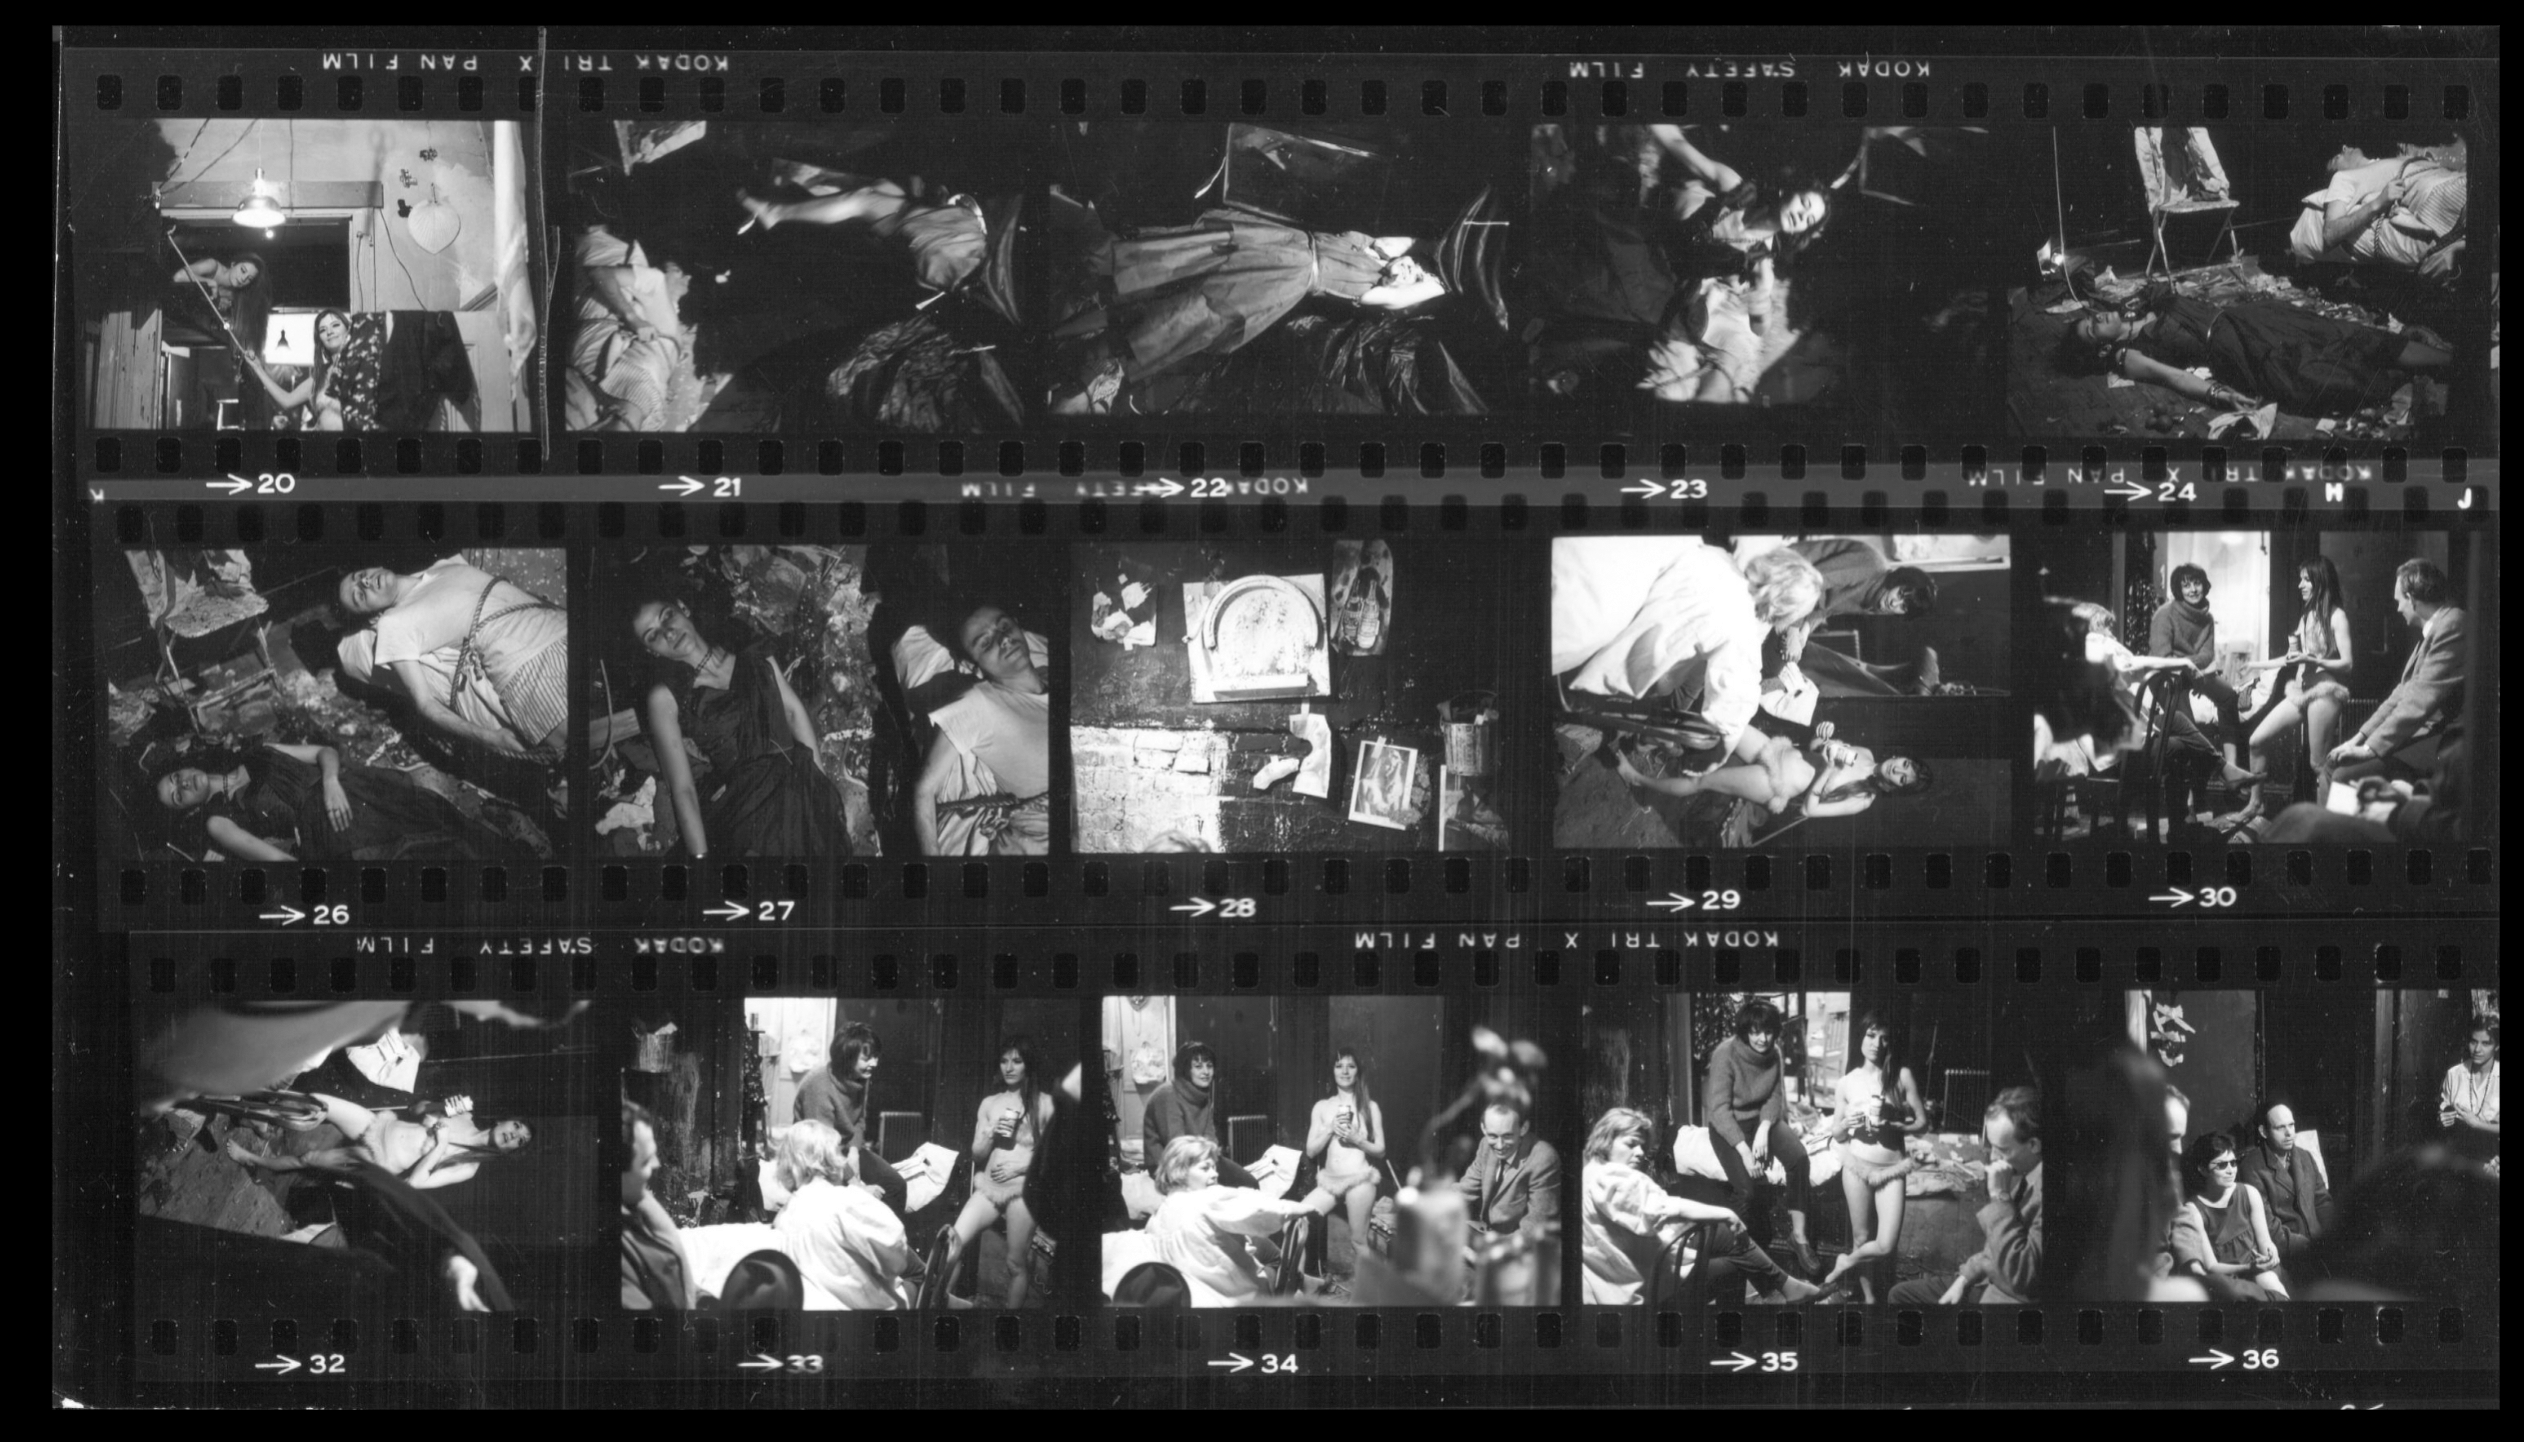 Contact sheet of Claes Oldenburg's Store Days, circa 1961